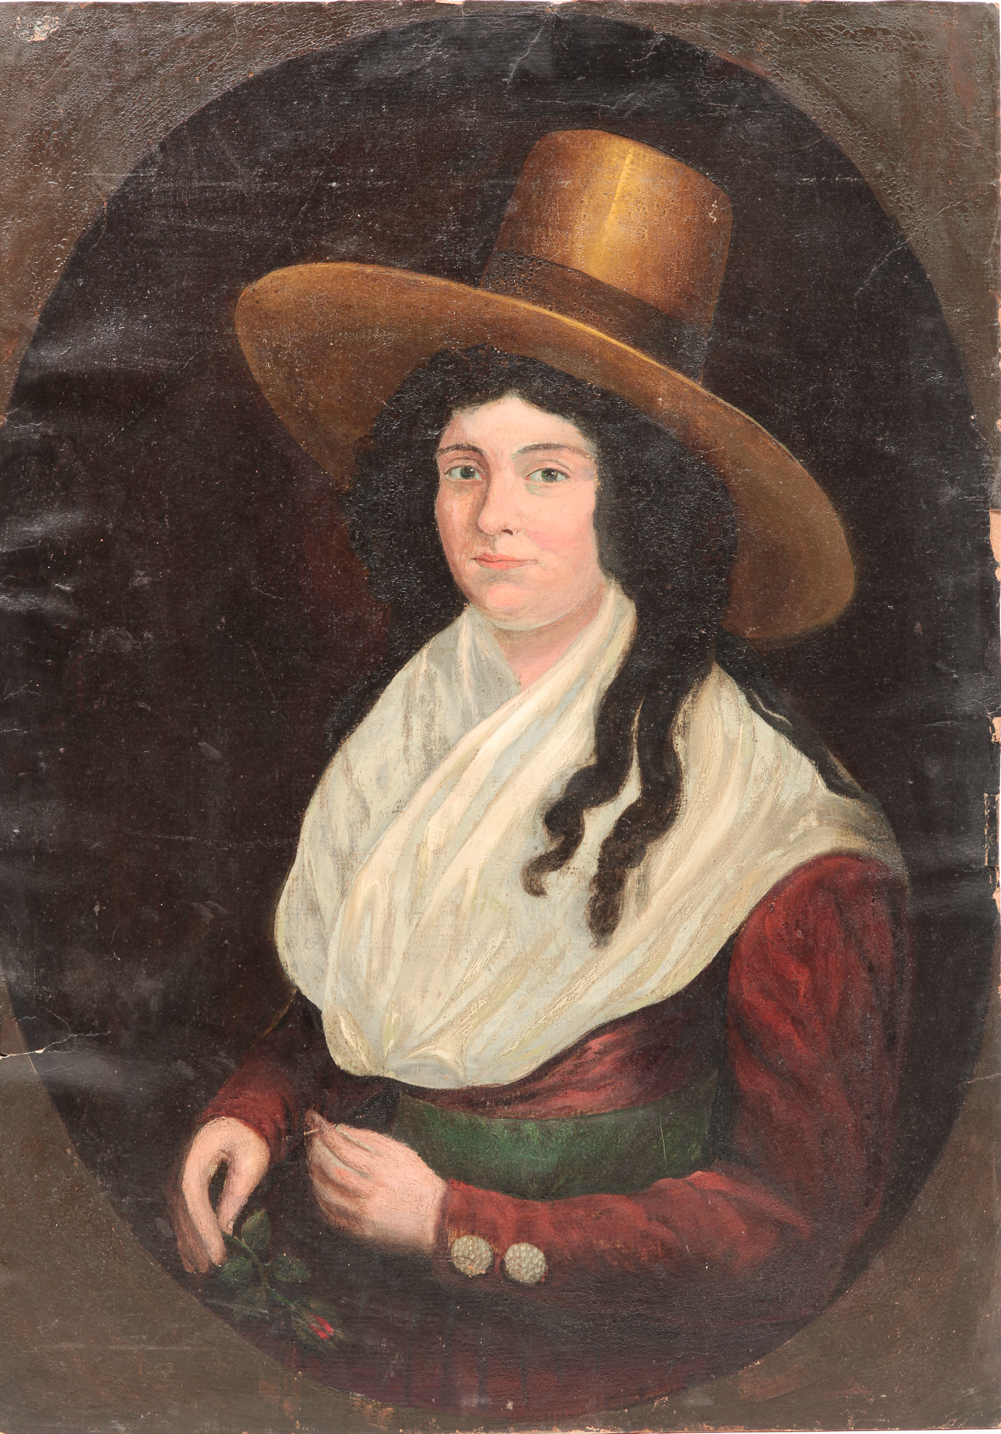 PORTRAIT OF A WOMAN IN TALL HAT  2dfd84